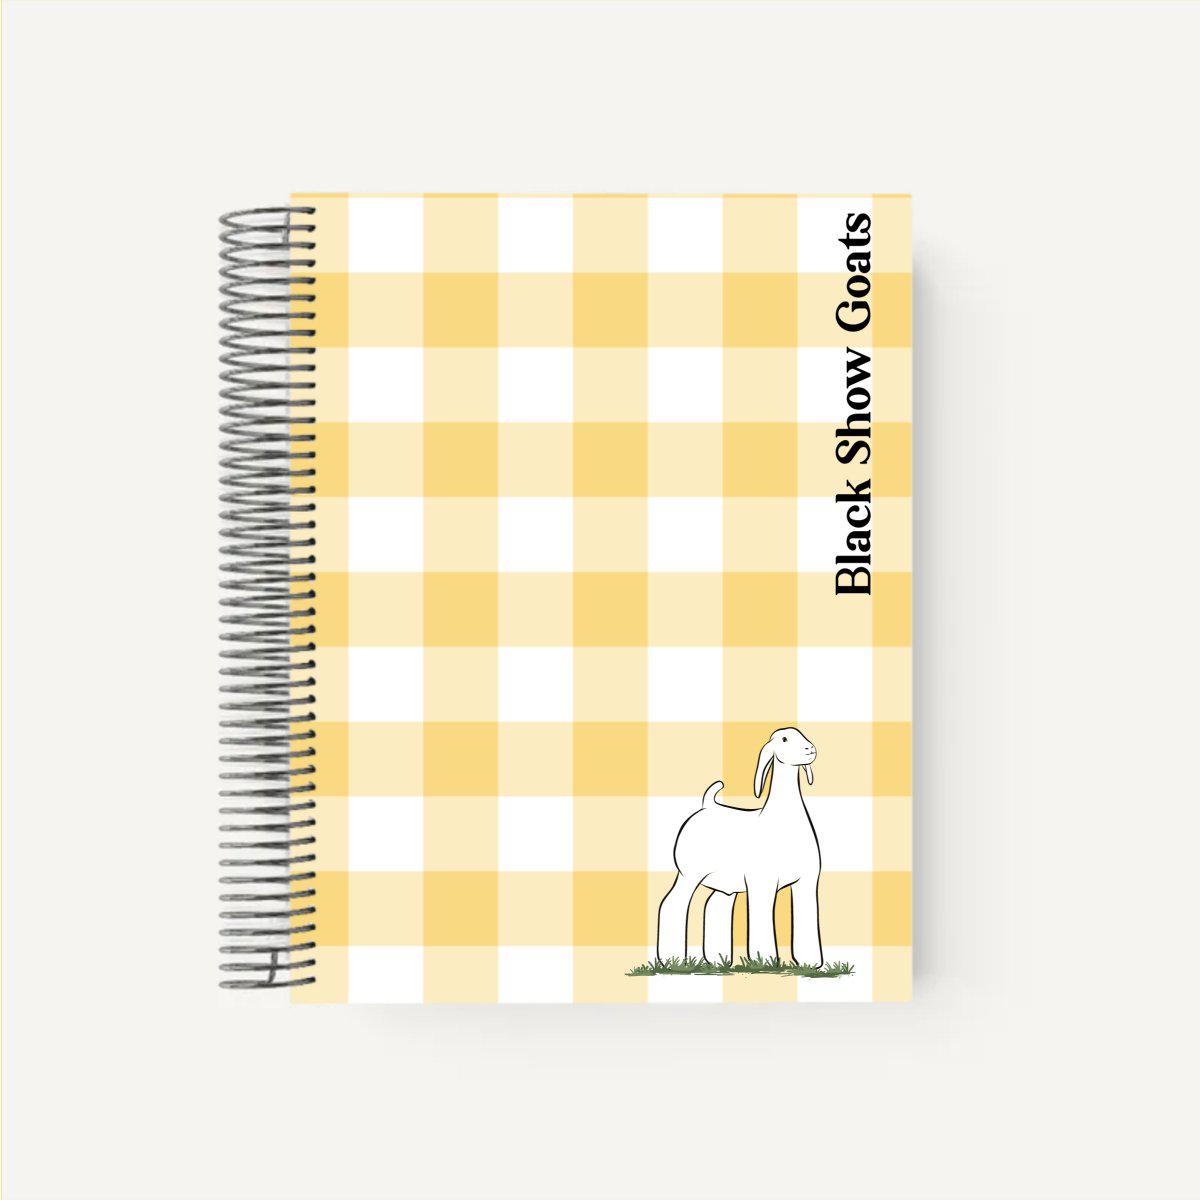 Personalized-Livestock-Kidding Record Planner - Gingham Cover